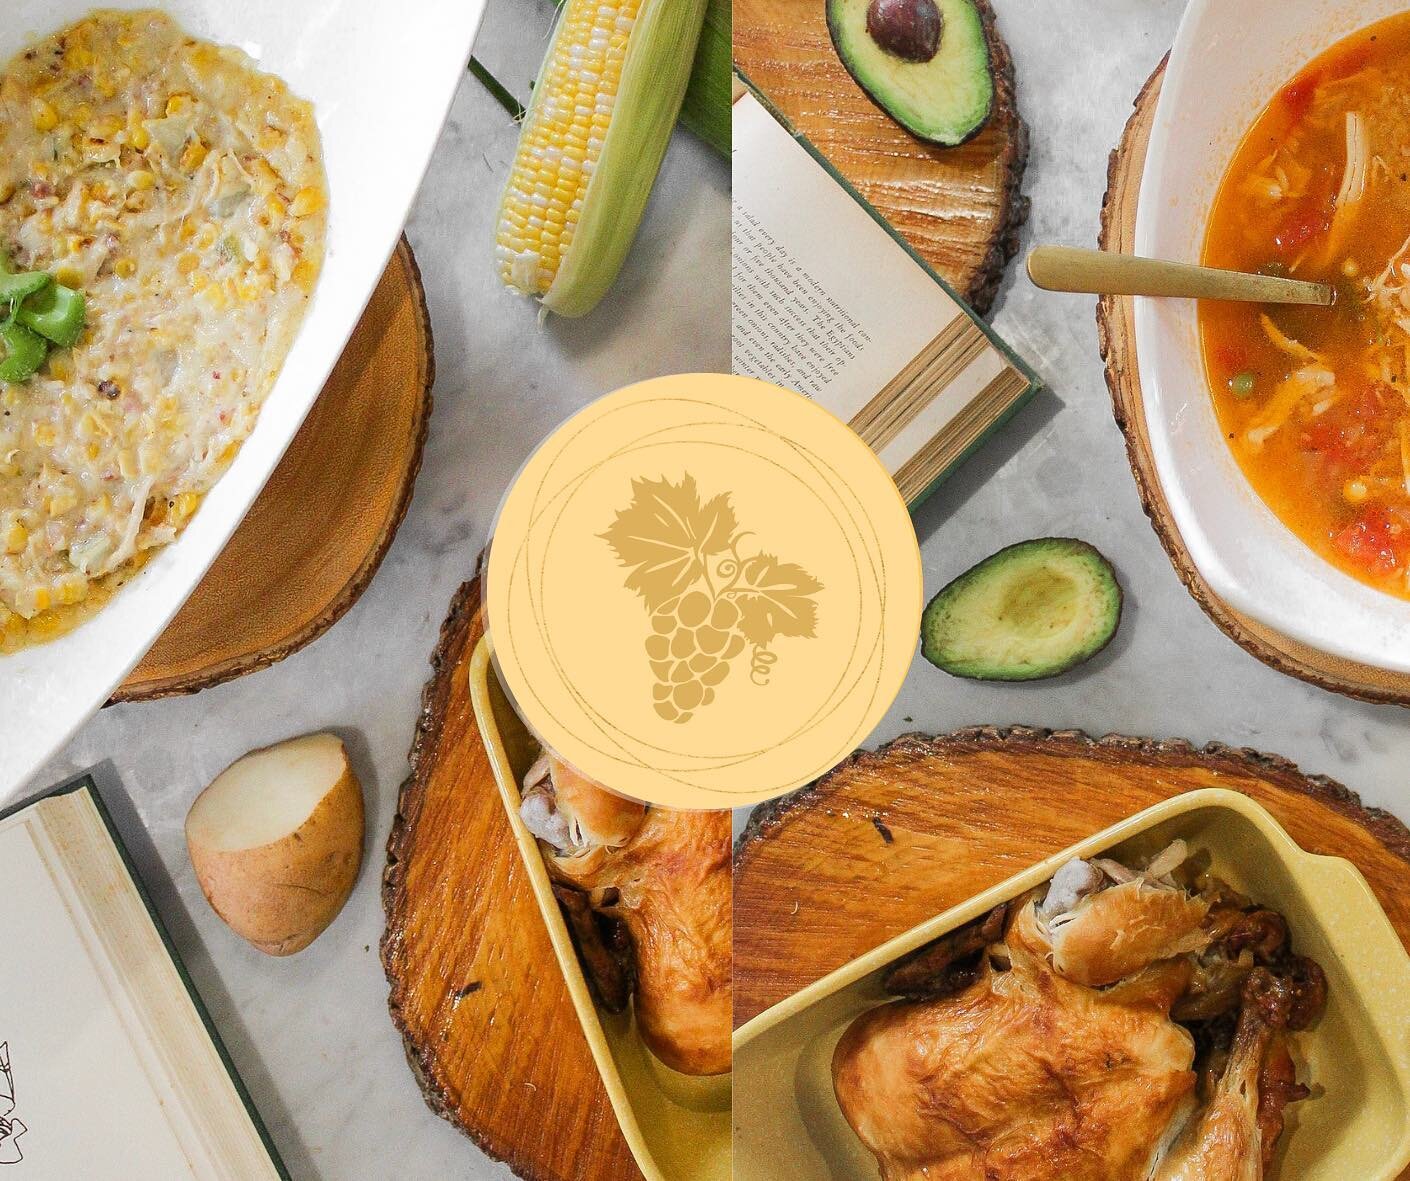 NEW ON THE SITE / SOUPS 

The ultimate comfort food for this upcoming season. Shop now, or tab the photo to see these two tasty options, our delicious Chicken Cord Chowder &amp; our Mexican Rice Soup served with Fresh Avocado Slices and Tortilla Chip